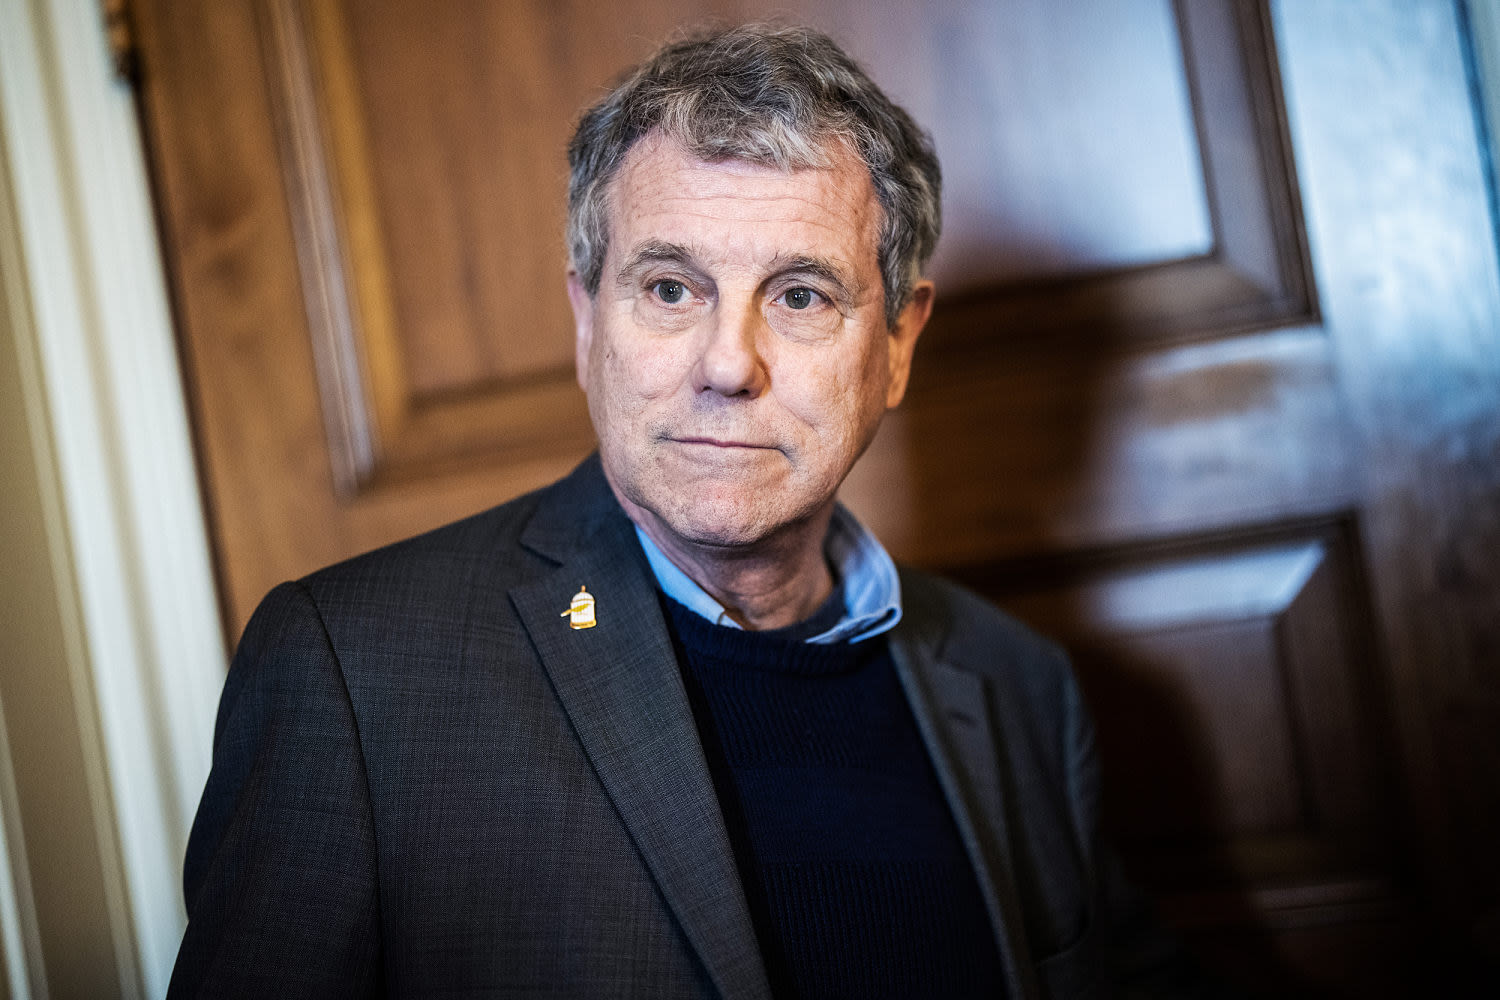 Ohio Sen. Sherrod Brown calls for Biden to drop out of the 2024 race